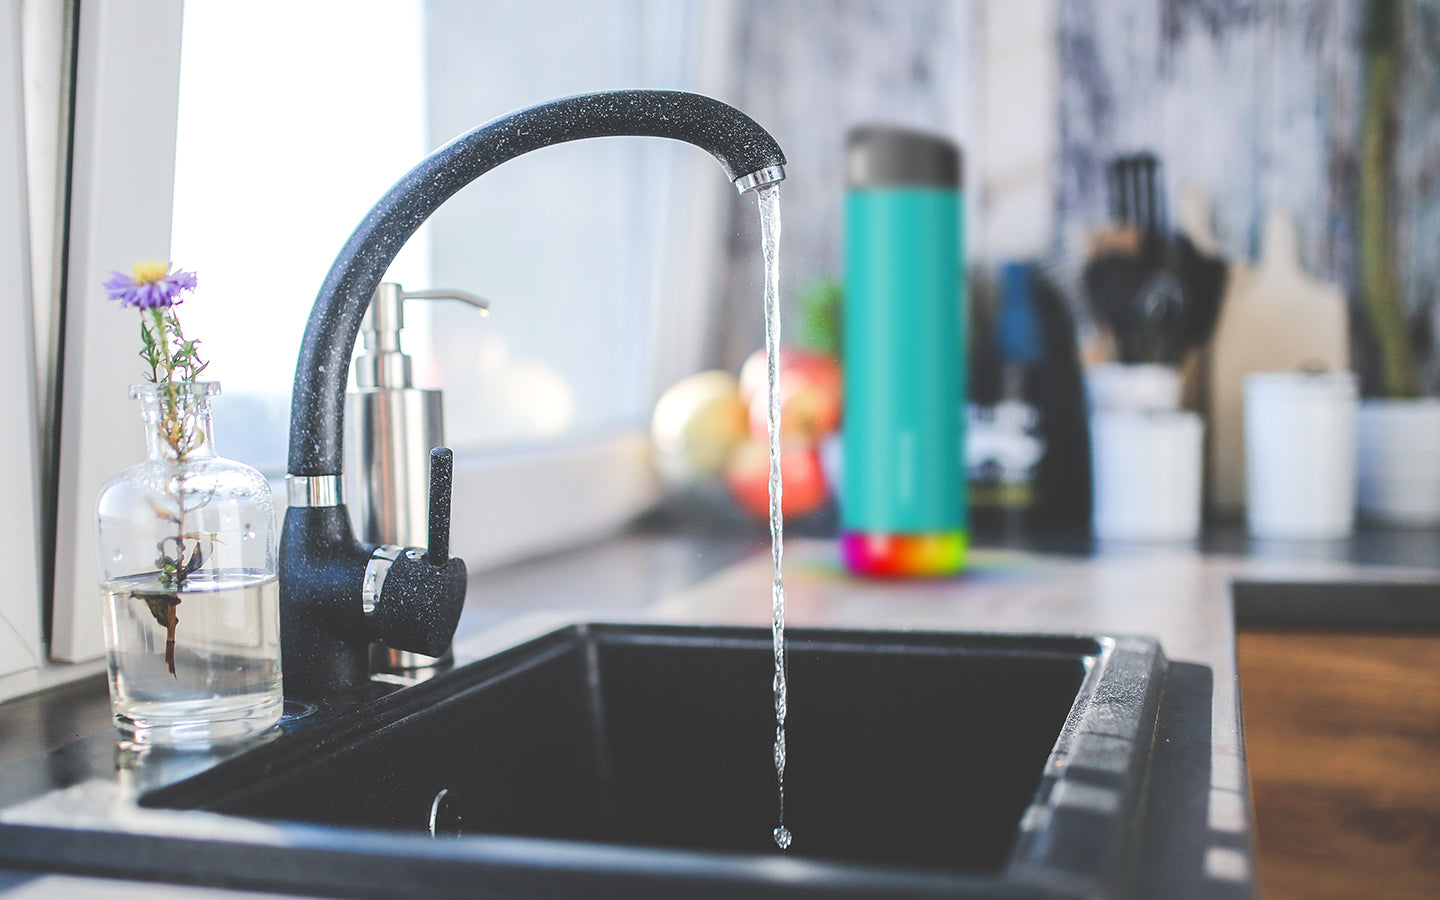 6 Tips to Conserve Water While Cooking